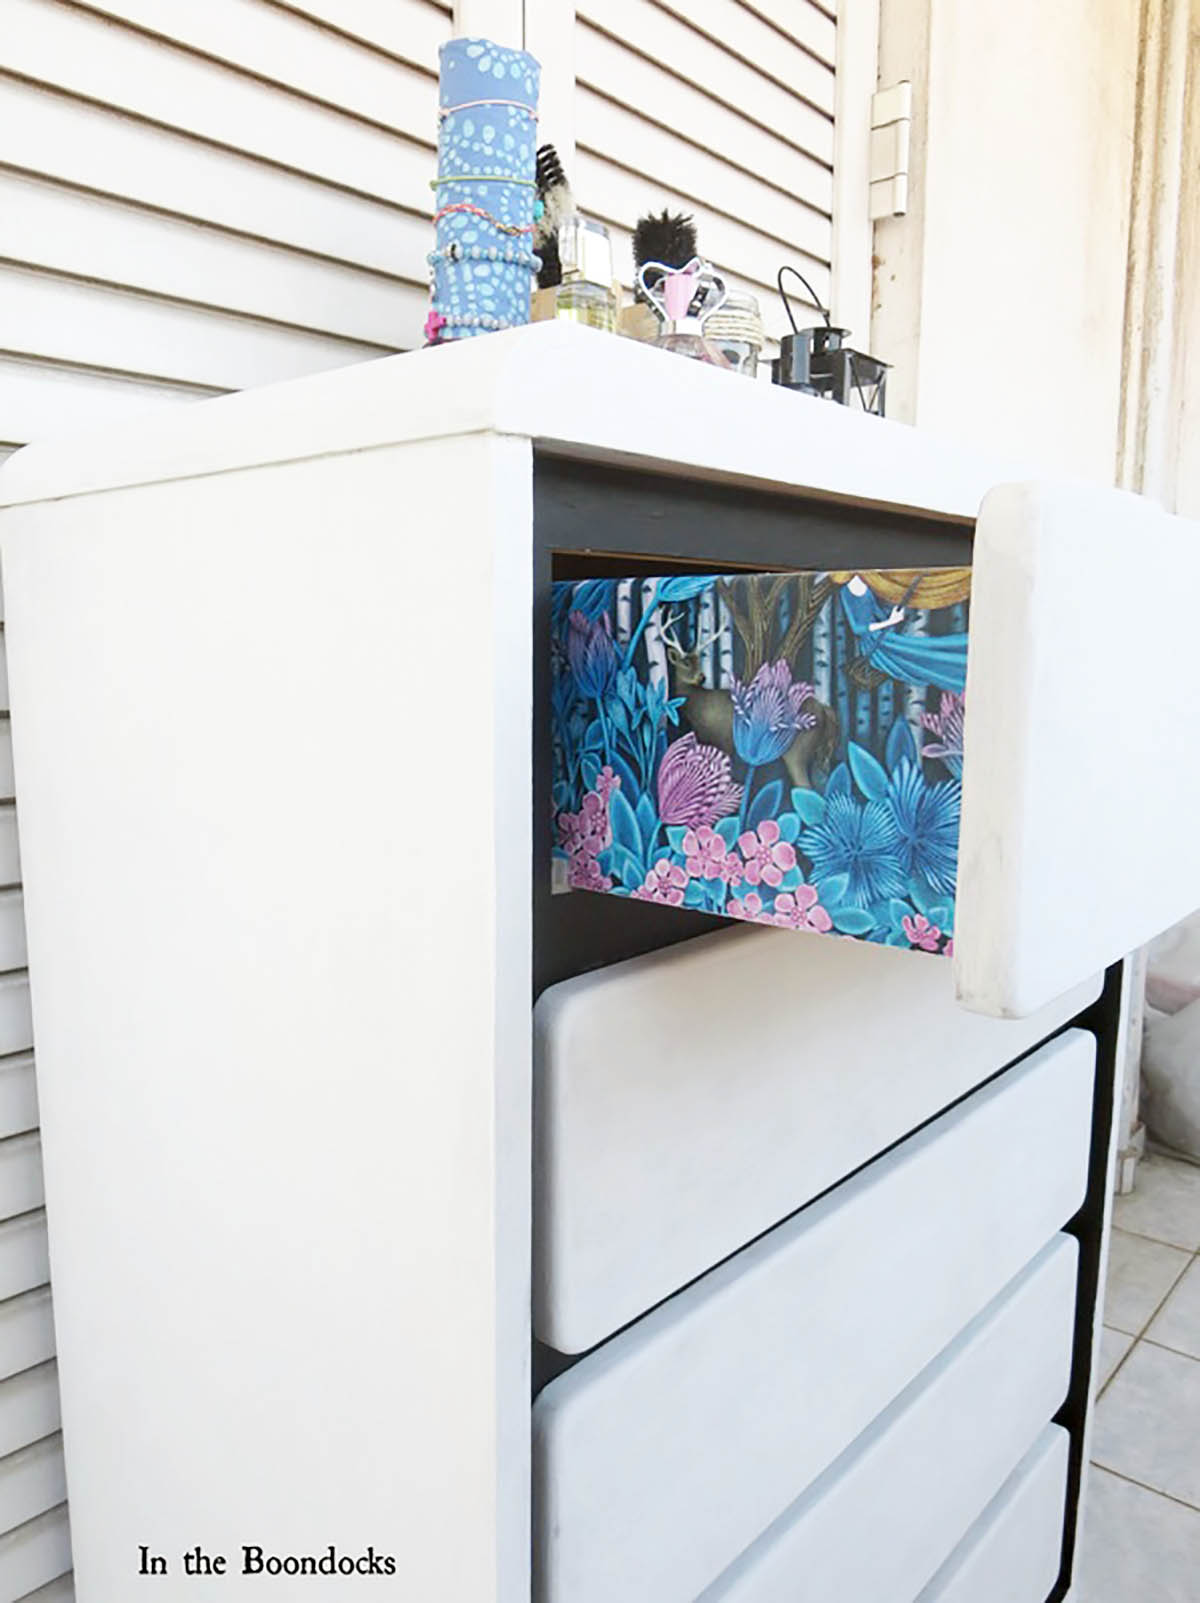 A side view of the DIY dresser makeover featuring blue and pink floral gift wrap decoupaged on the sides of the drawers.